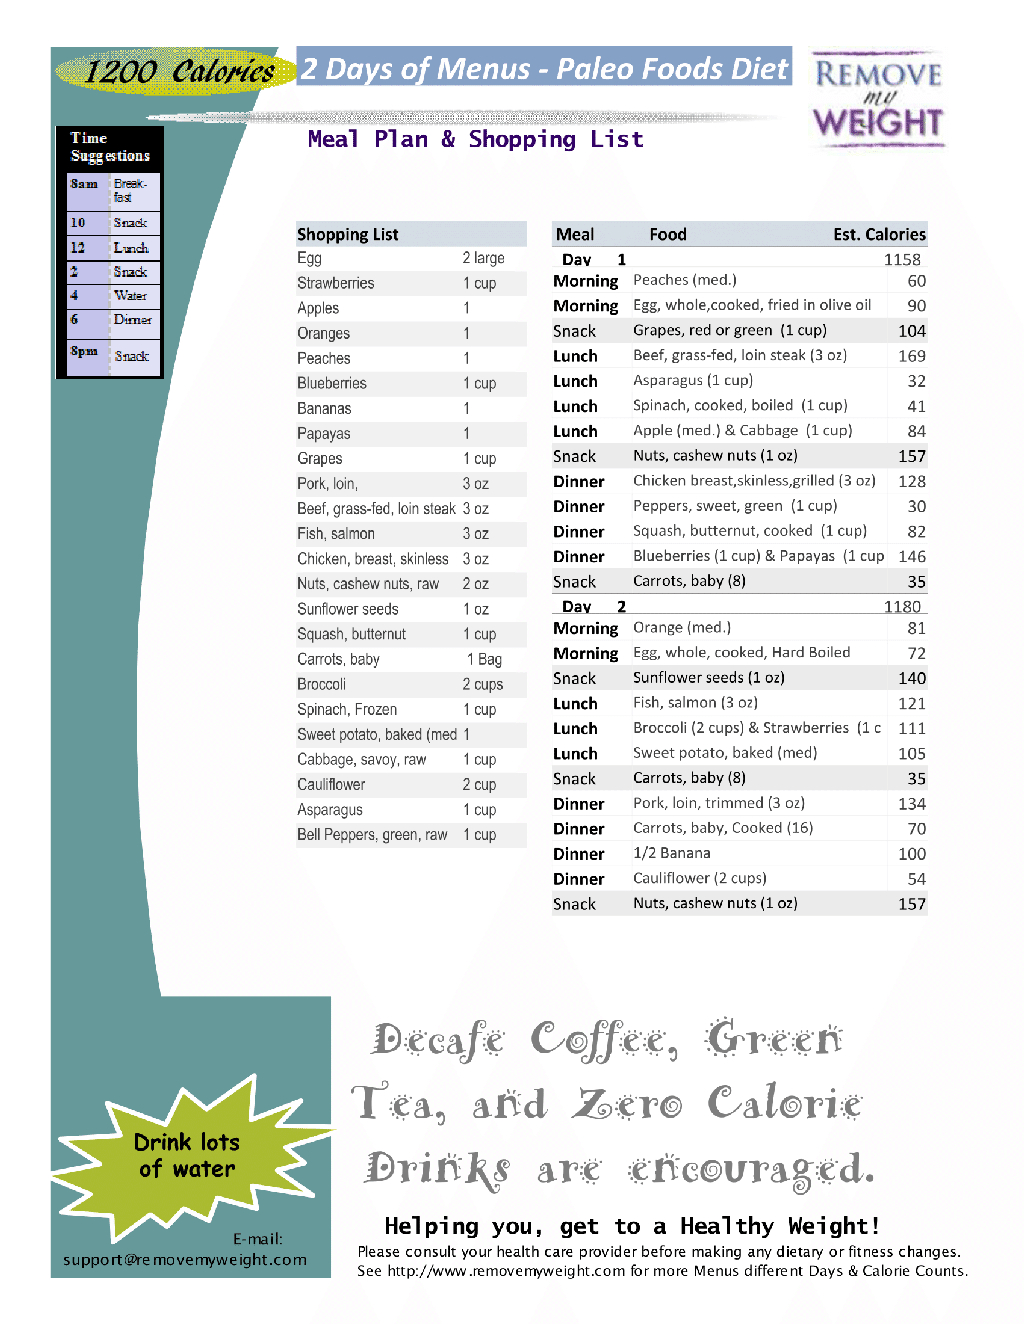 Easy One Page, Paleo Diet Menu Plan, 1200 Calories A Day Try It For - Free Printable 1200 Calorie Diet Menu